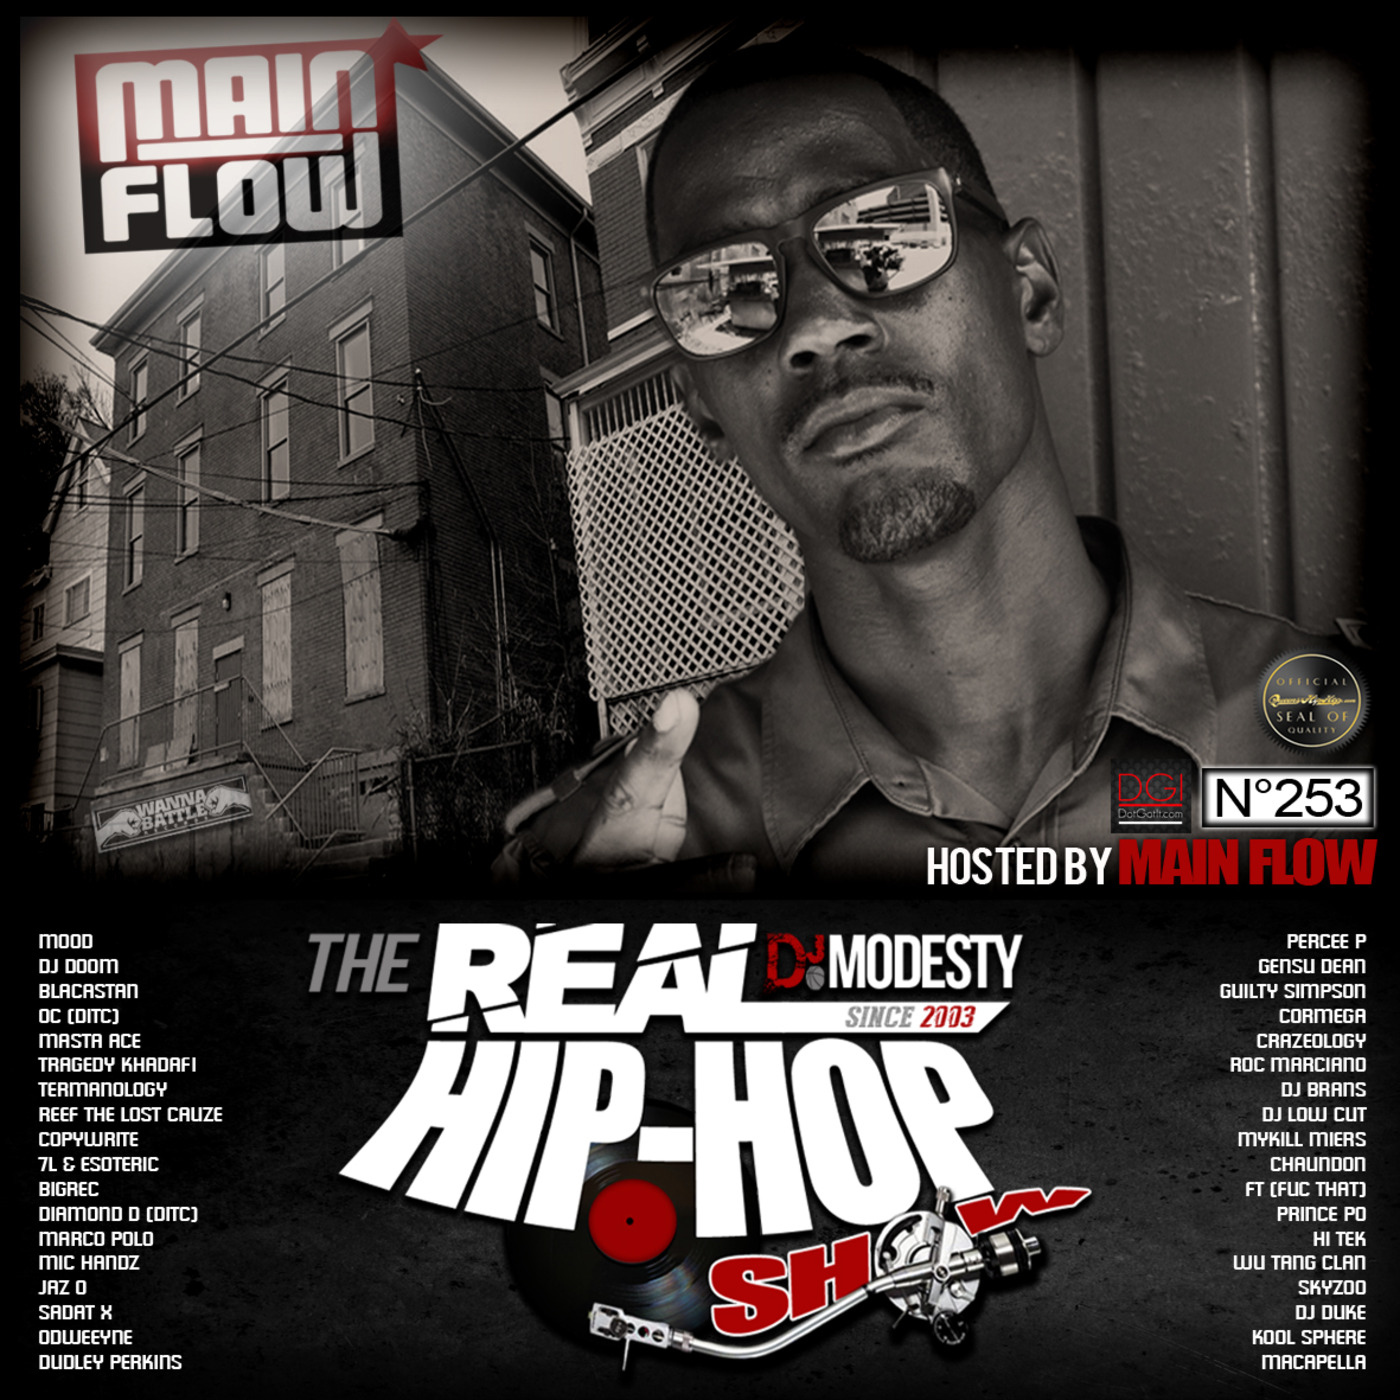 DJ MODESTY - THE REAL HIP HOP SHOW N°253 (Hosted by MAIN FLOW)